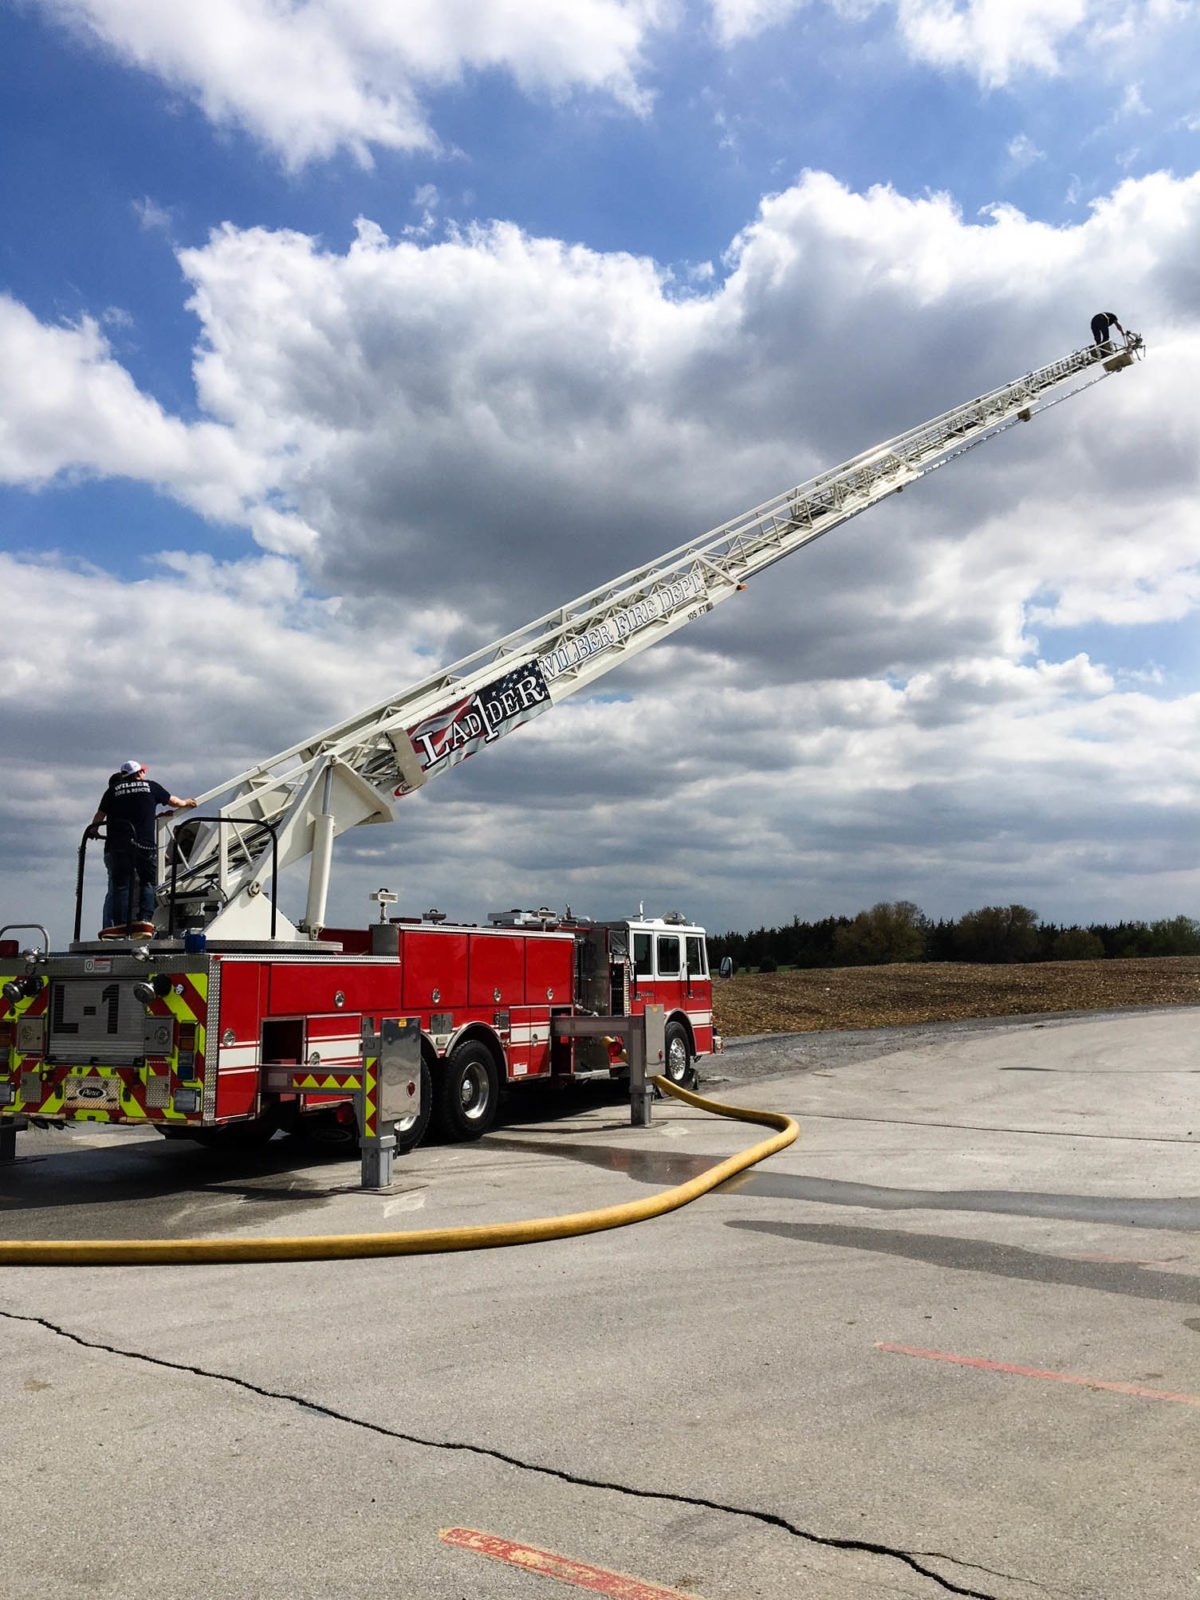 Wilber Fire & Rescue - Aerial